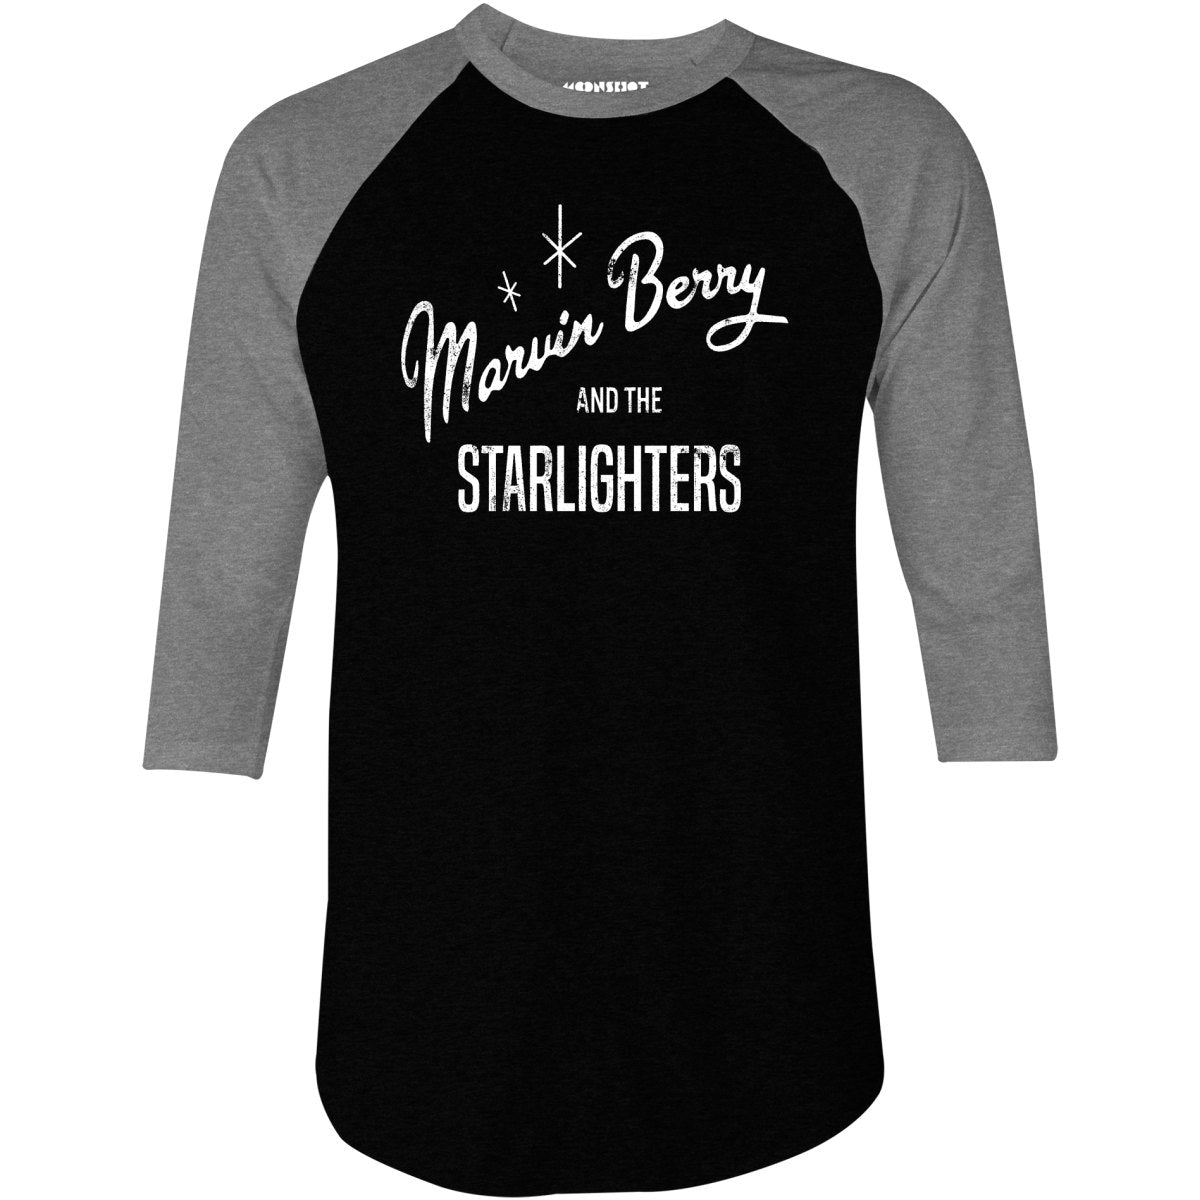 Marvin Berry and The Starlighters - 3/4 Sleeve Raglan T-Shirt